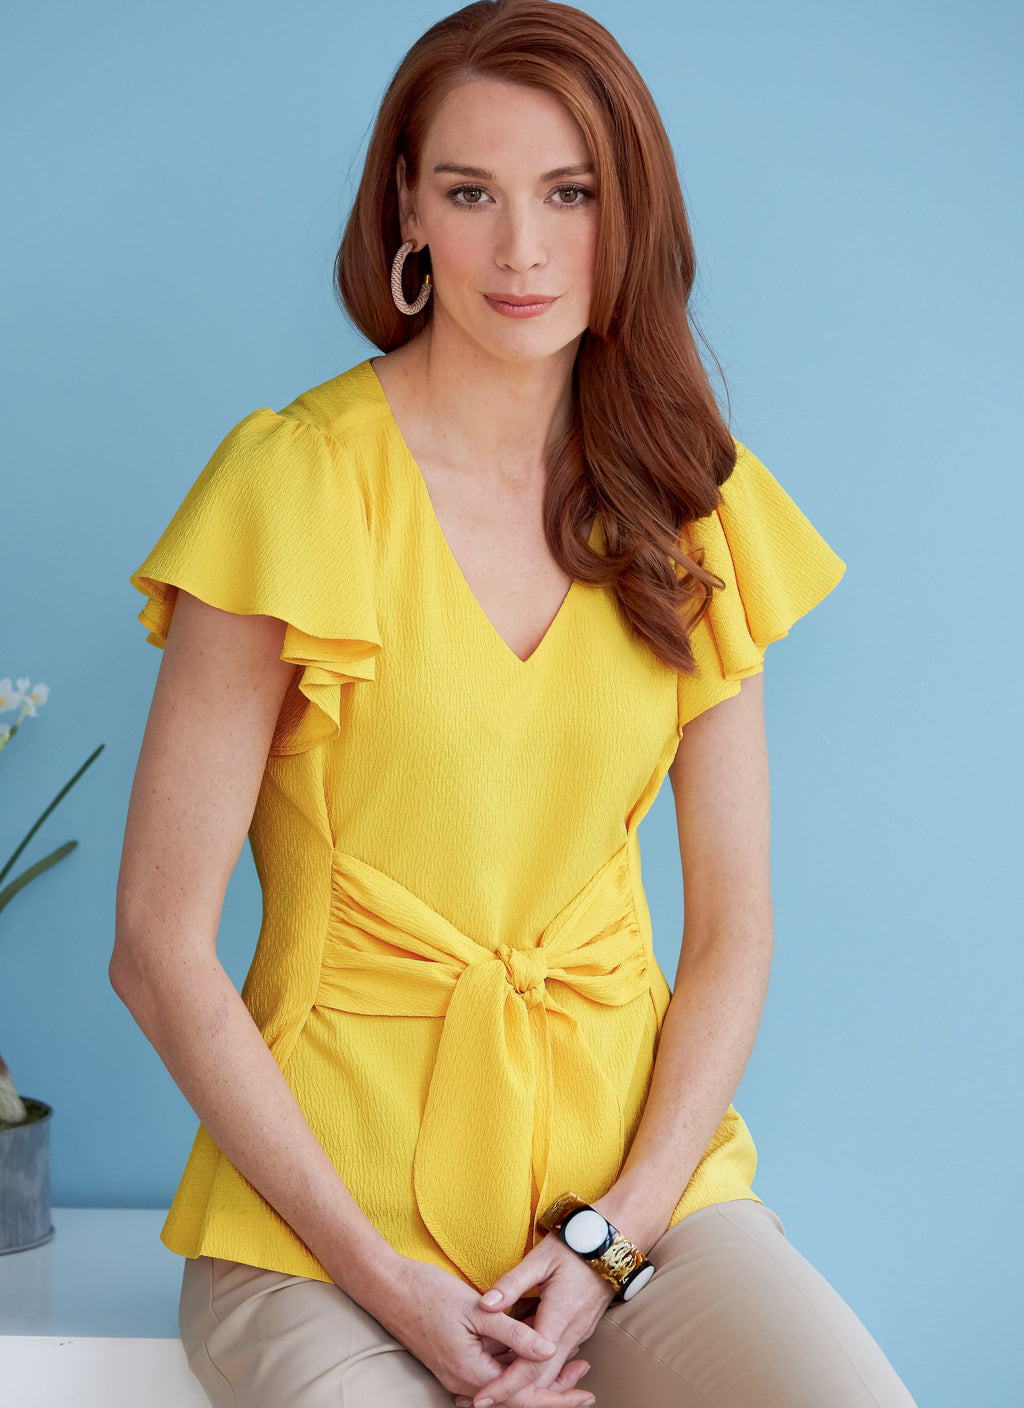 Butterick Sewing Pattern 6731 Misses' Top